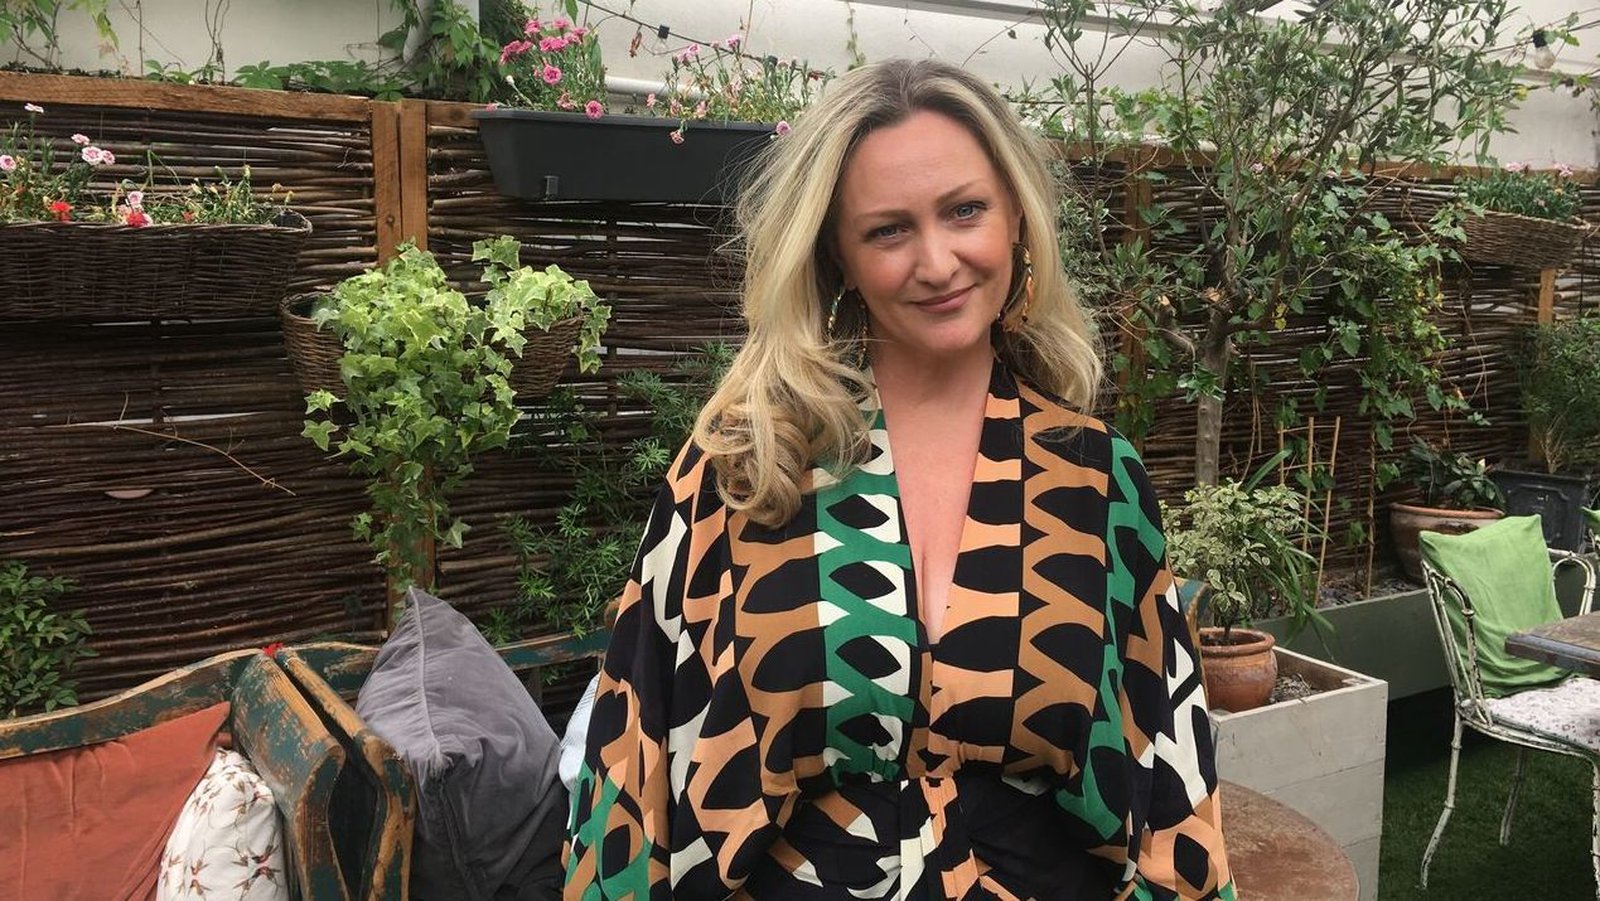 Sinead Keenan's top style tips for mums returning to work